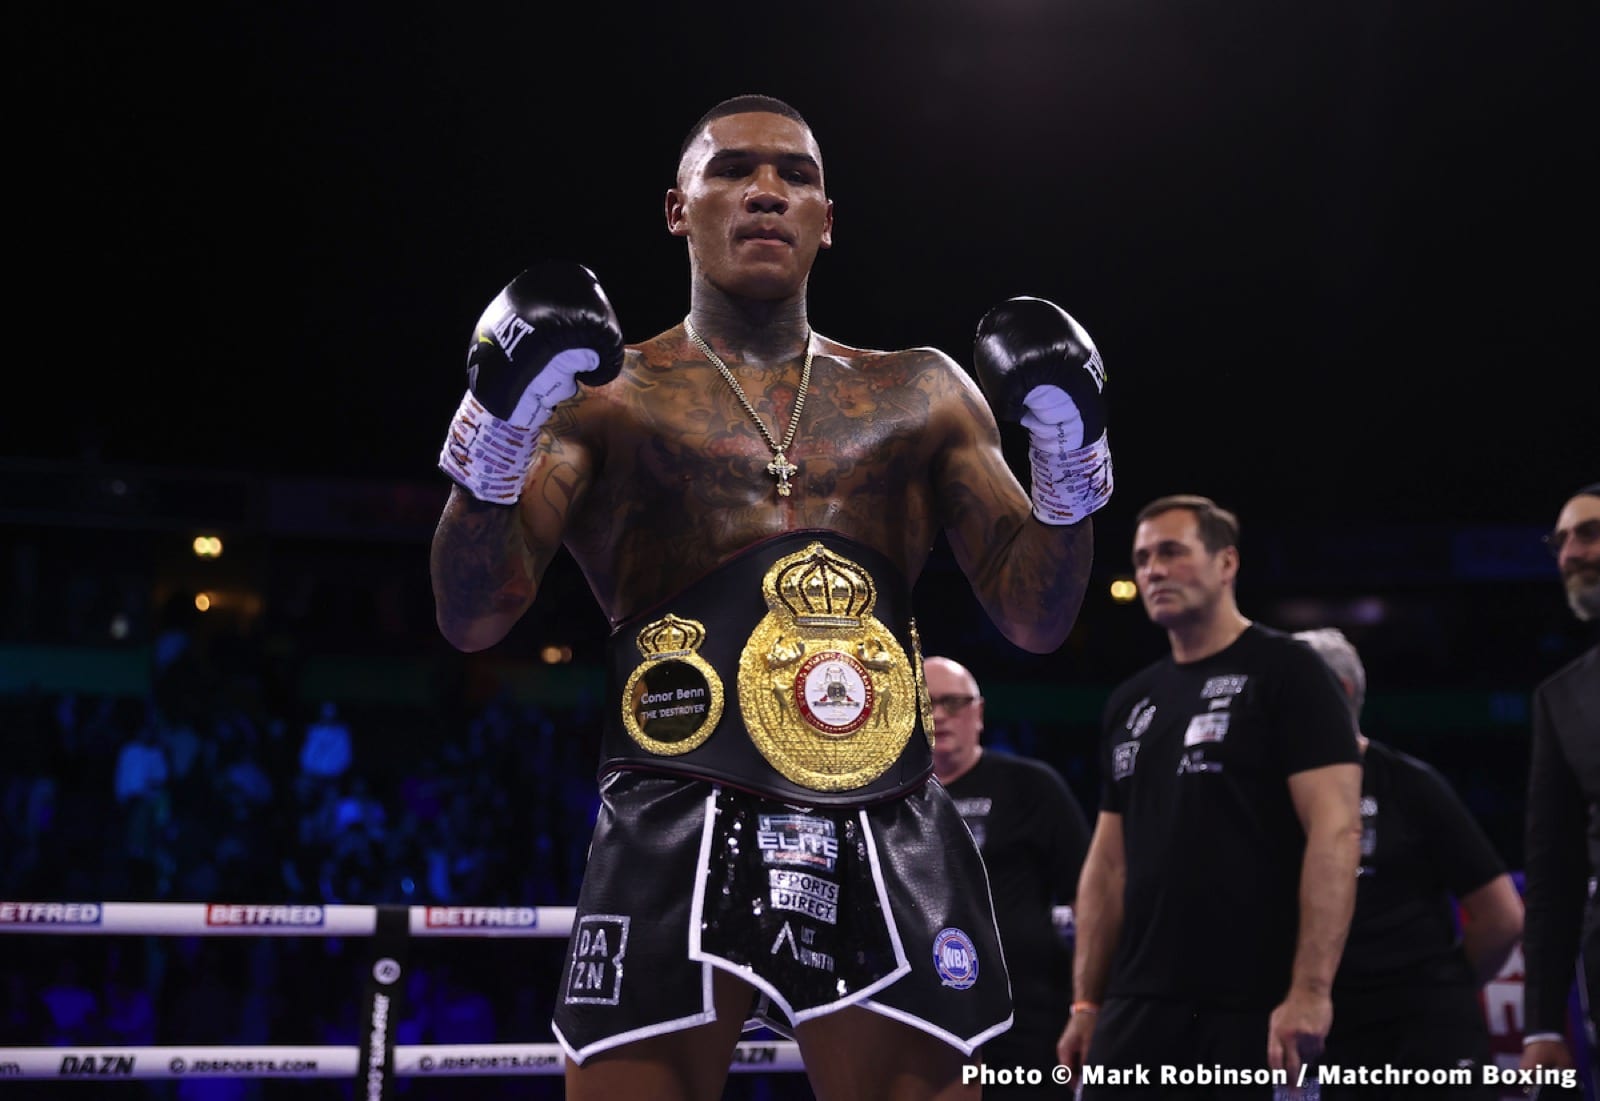 Image: Conor Benn to return to WBC rankings, getting favorable ruling from investigation